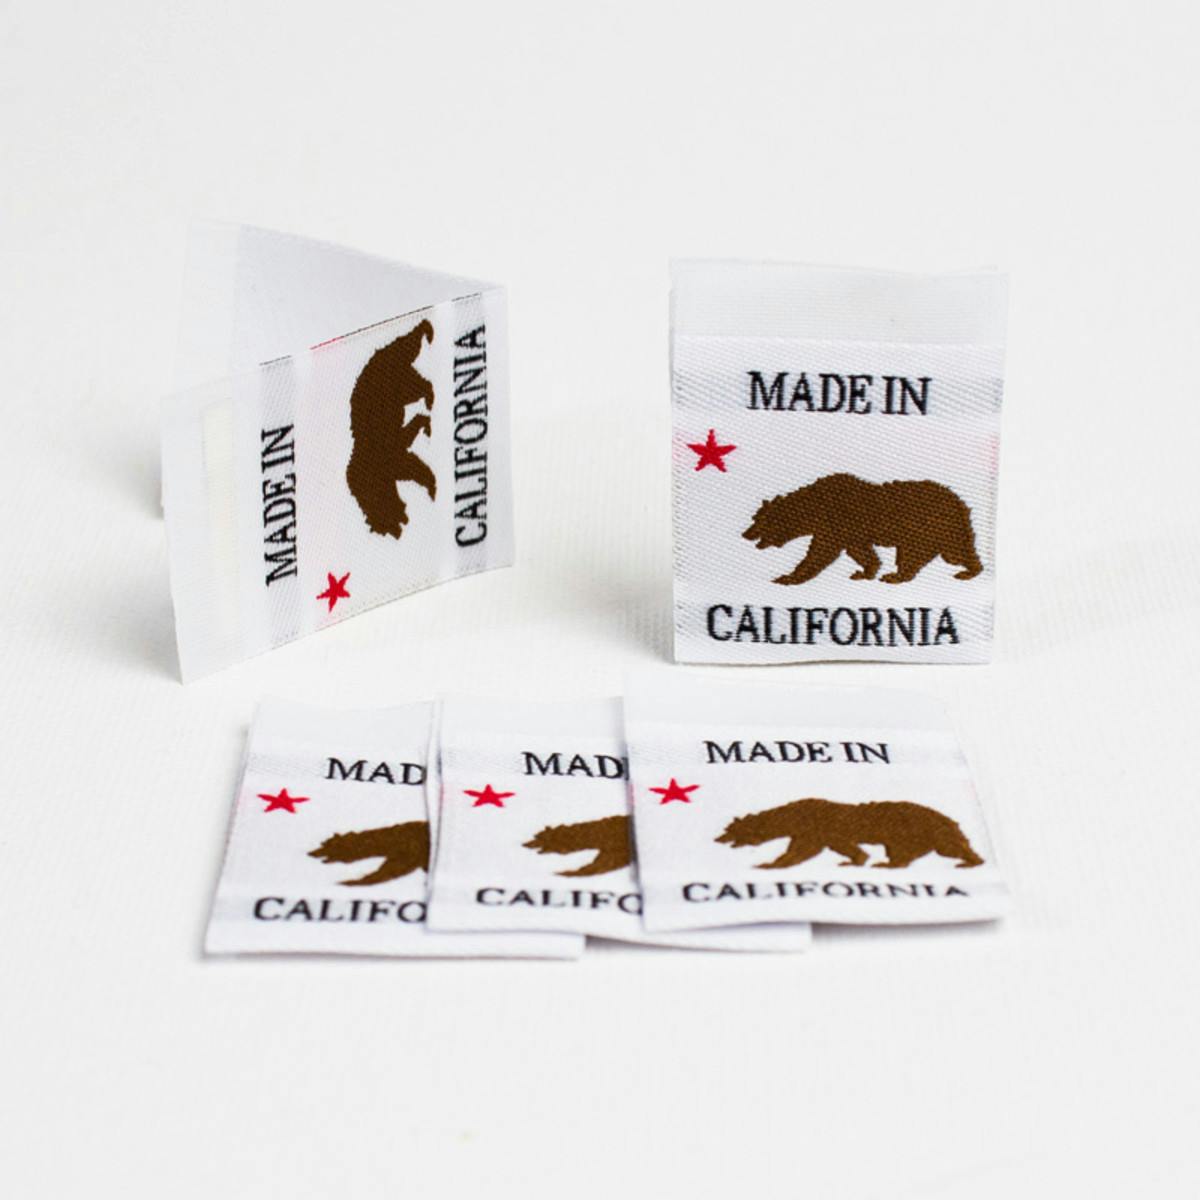  Made-in labels